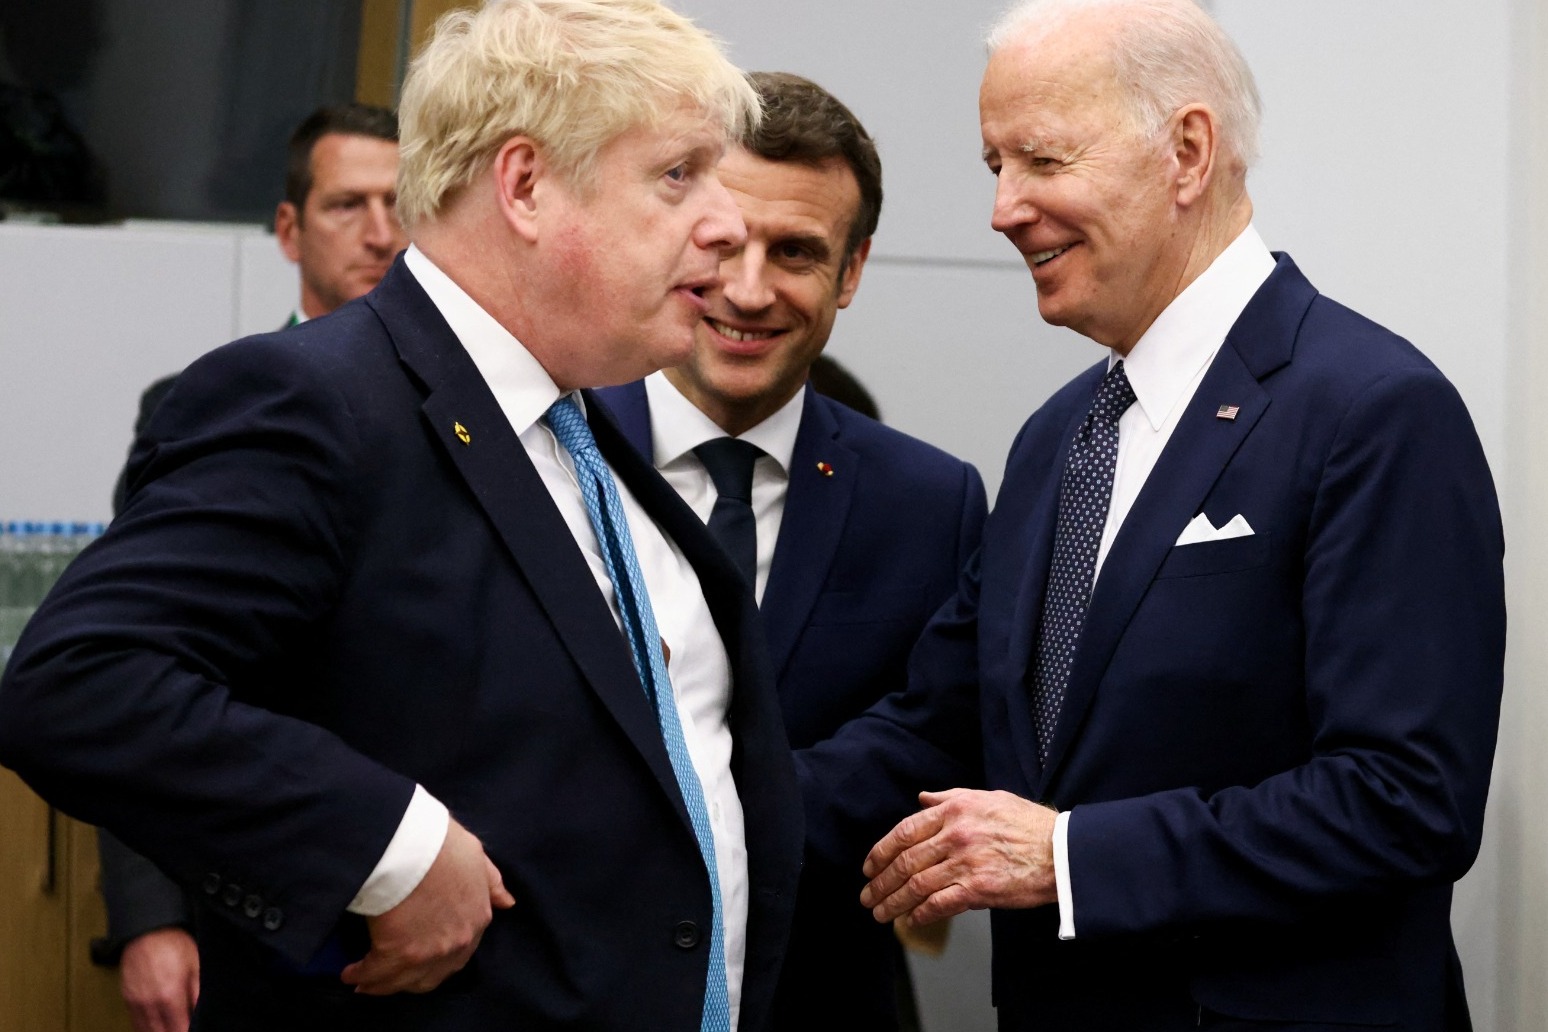 Joe Biden to outline countries joining new Asia trade pact 